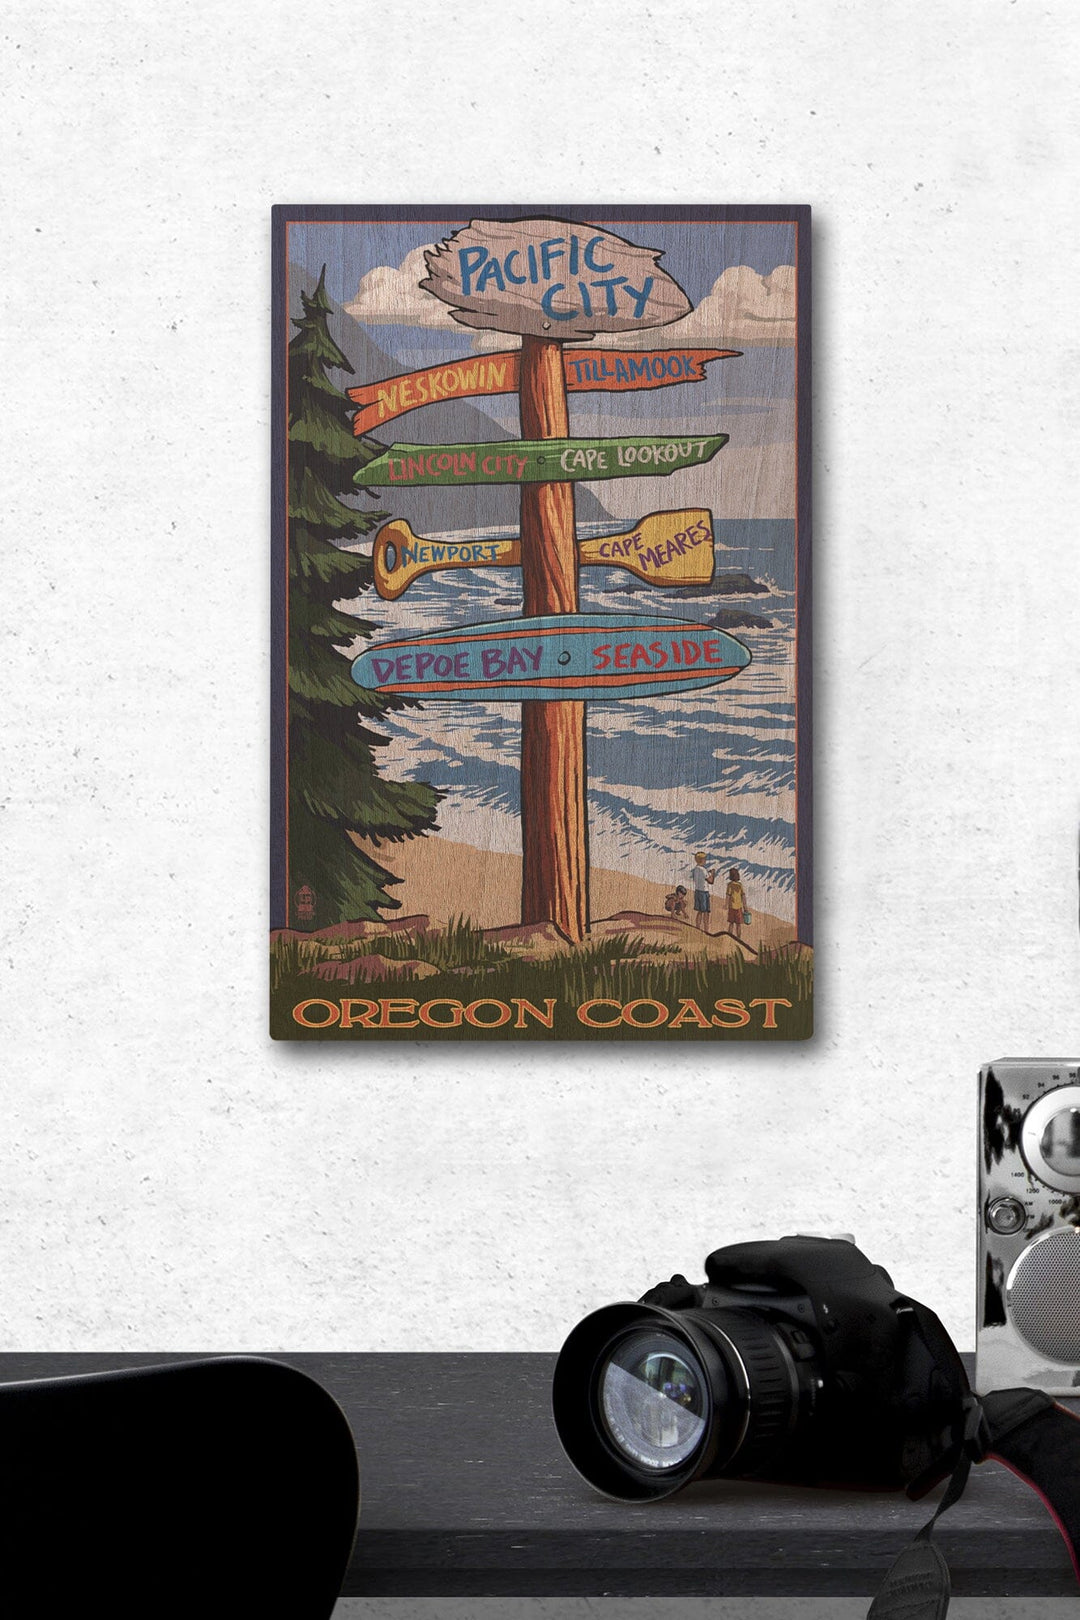 Pacific City, Oregon Destinations Sign, Lantern Press Poster, Wood Signs and Postcards Wood Lantern Press 12 x 18 Wood Gallery Print 